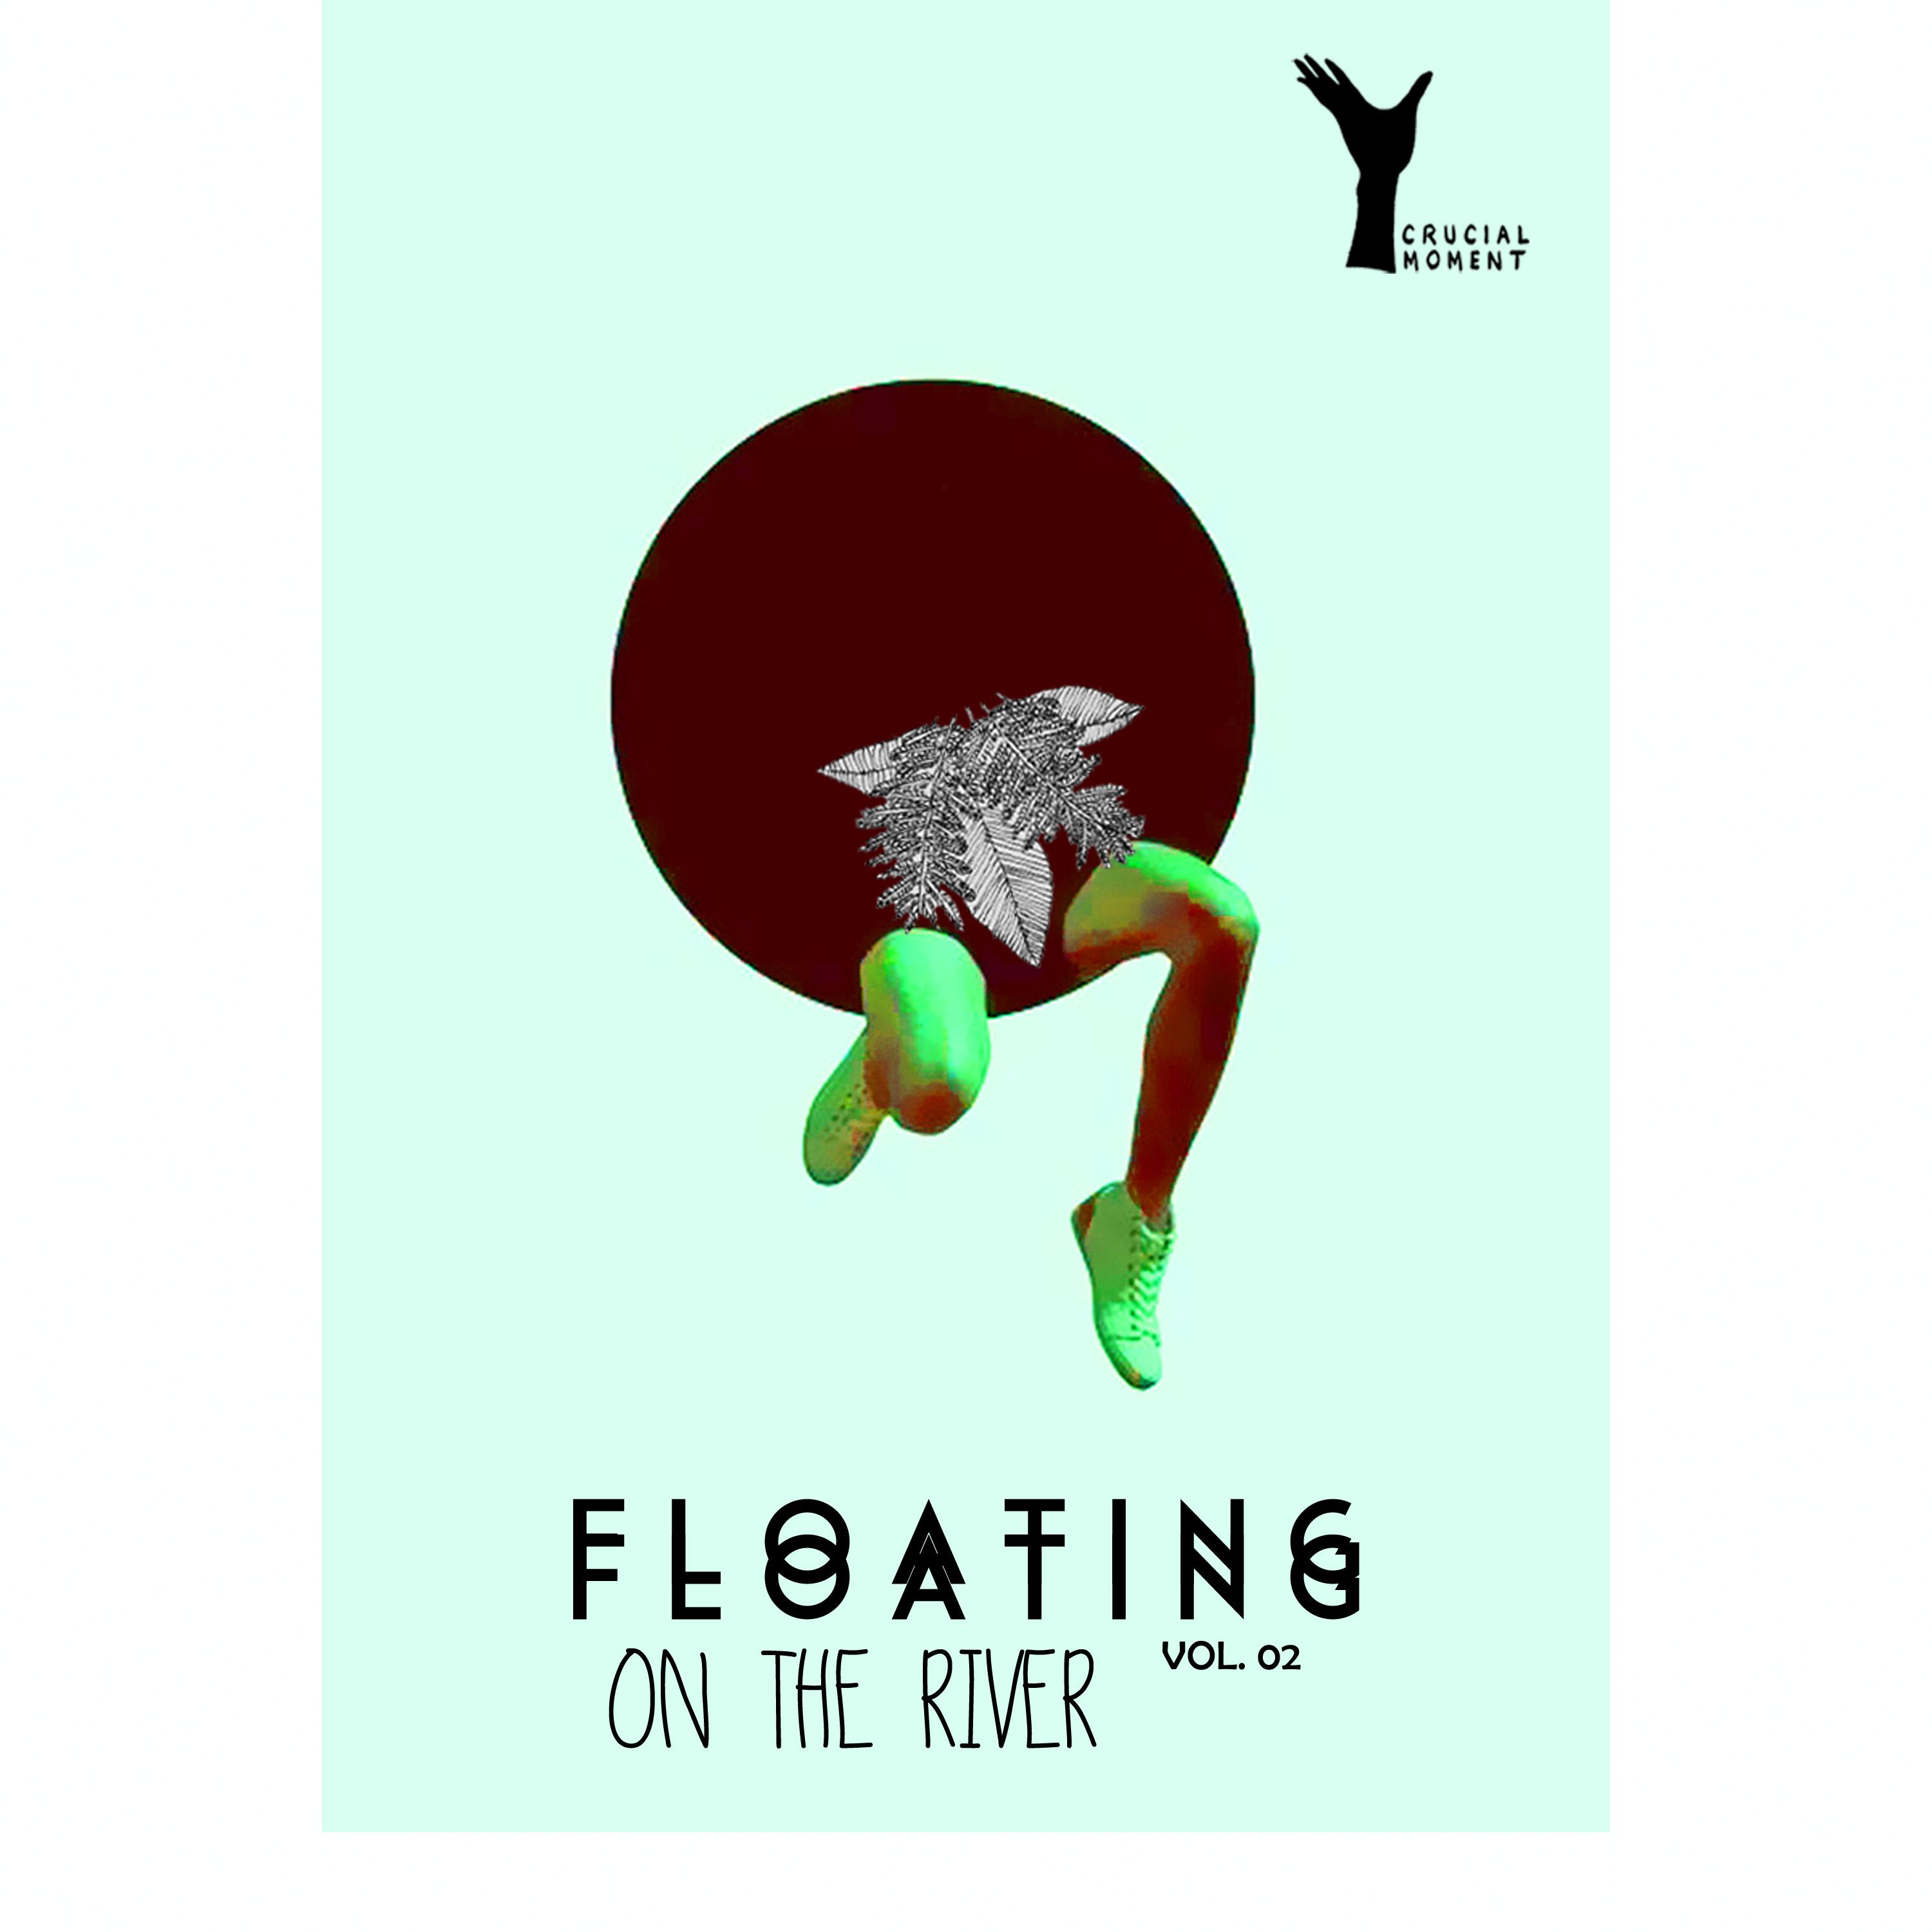 Floating on the River, Vol. 02